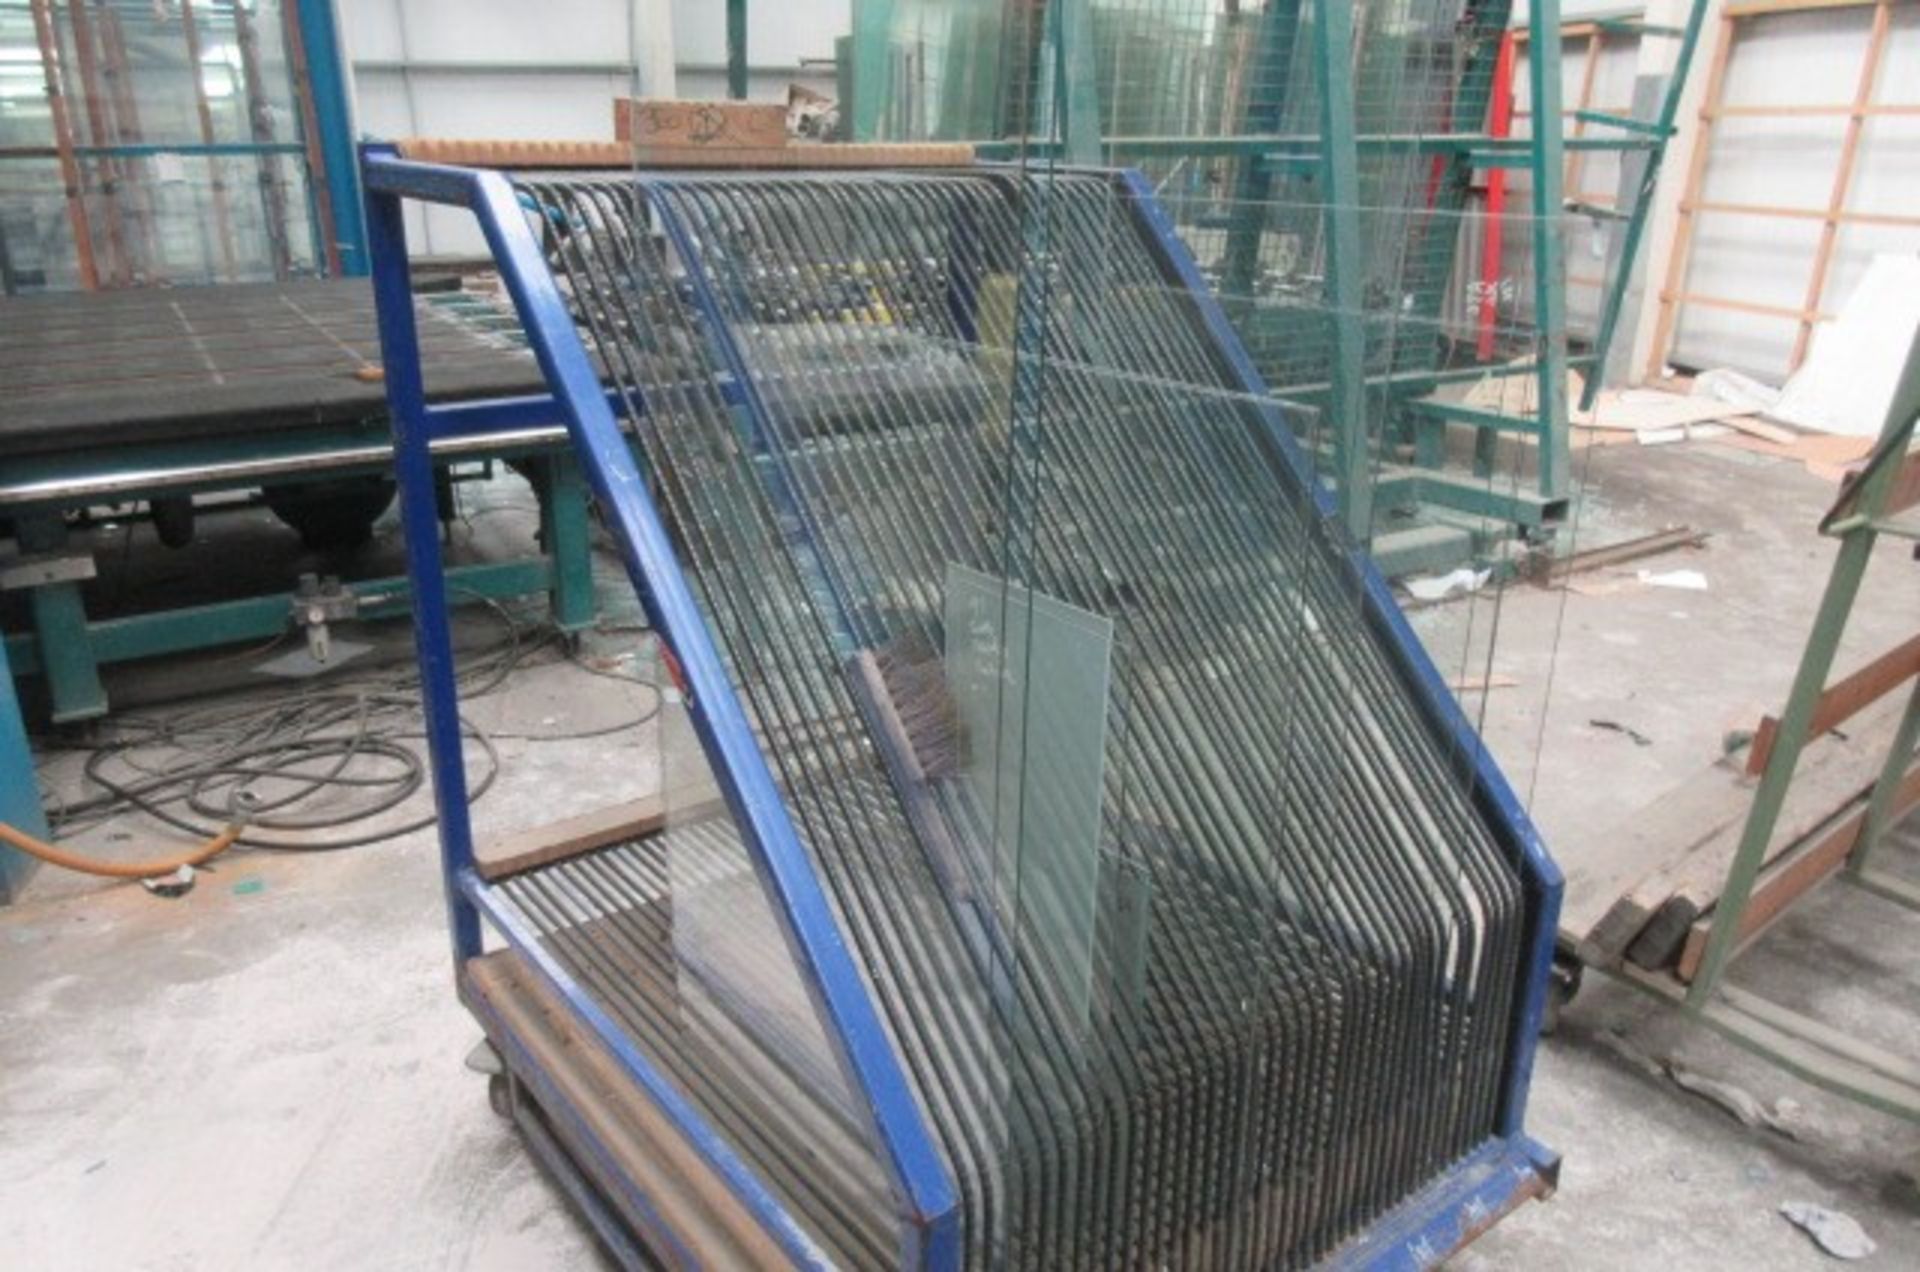 Four mobile 60 space glass transportation racks. Size 1300 x 1300 x 1500mm high.